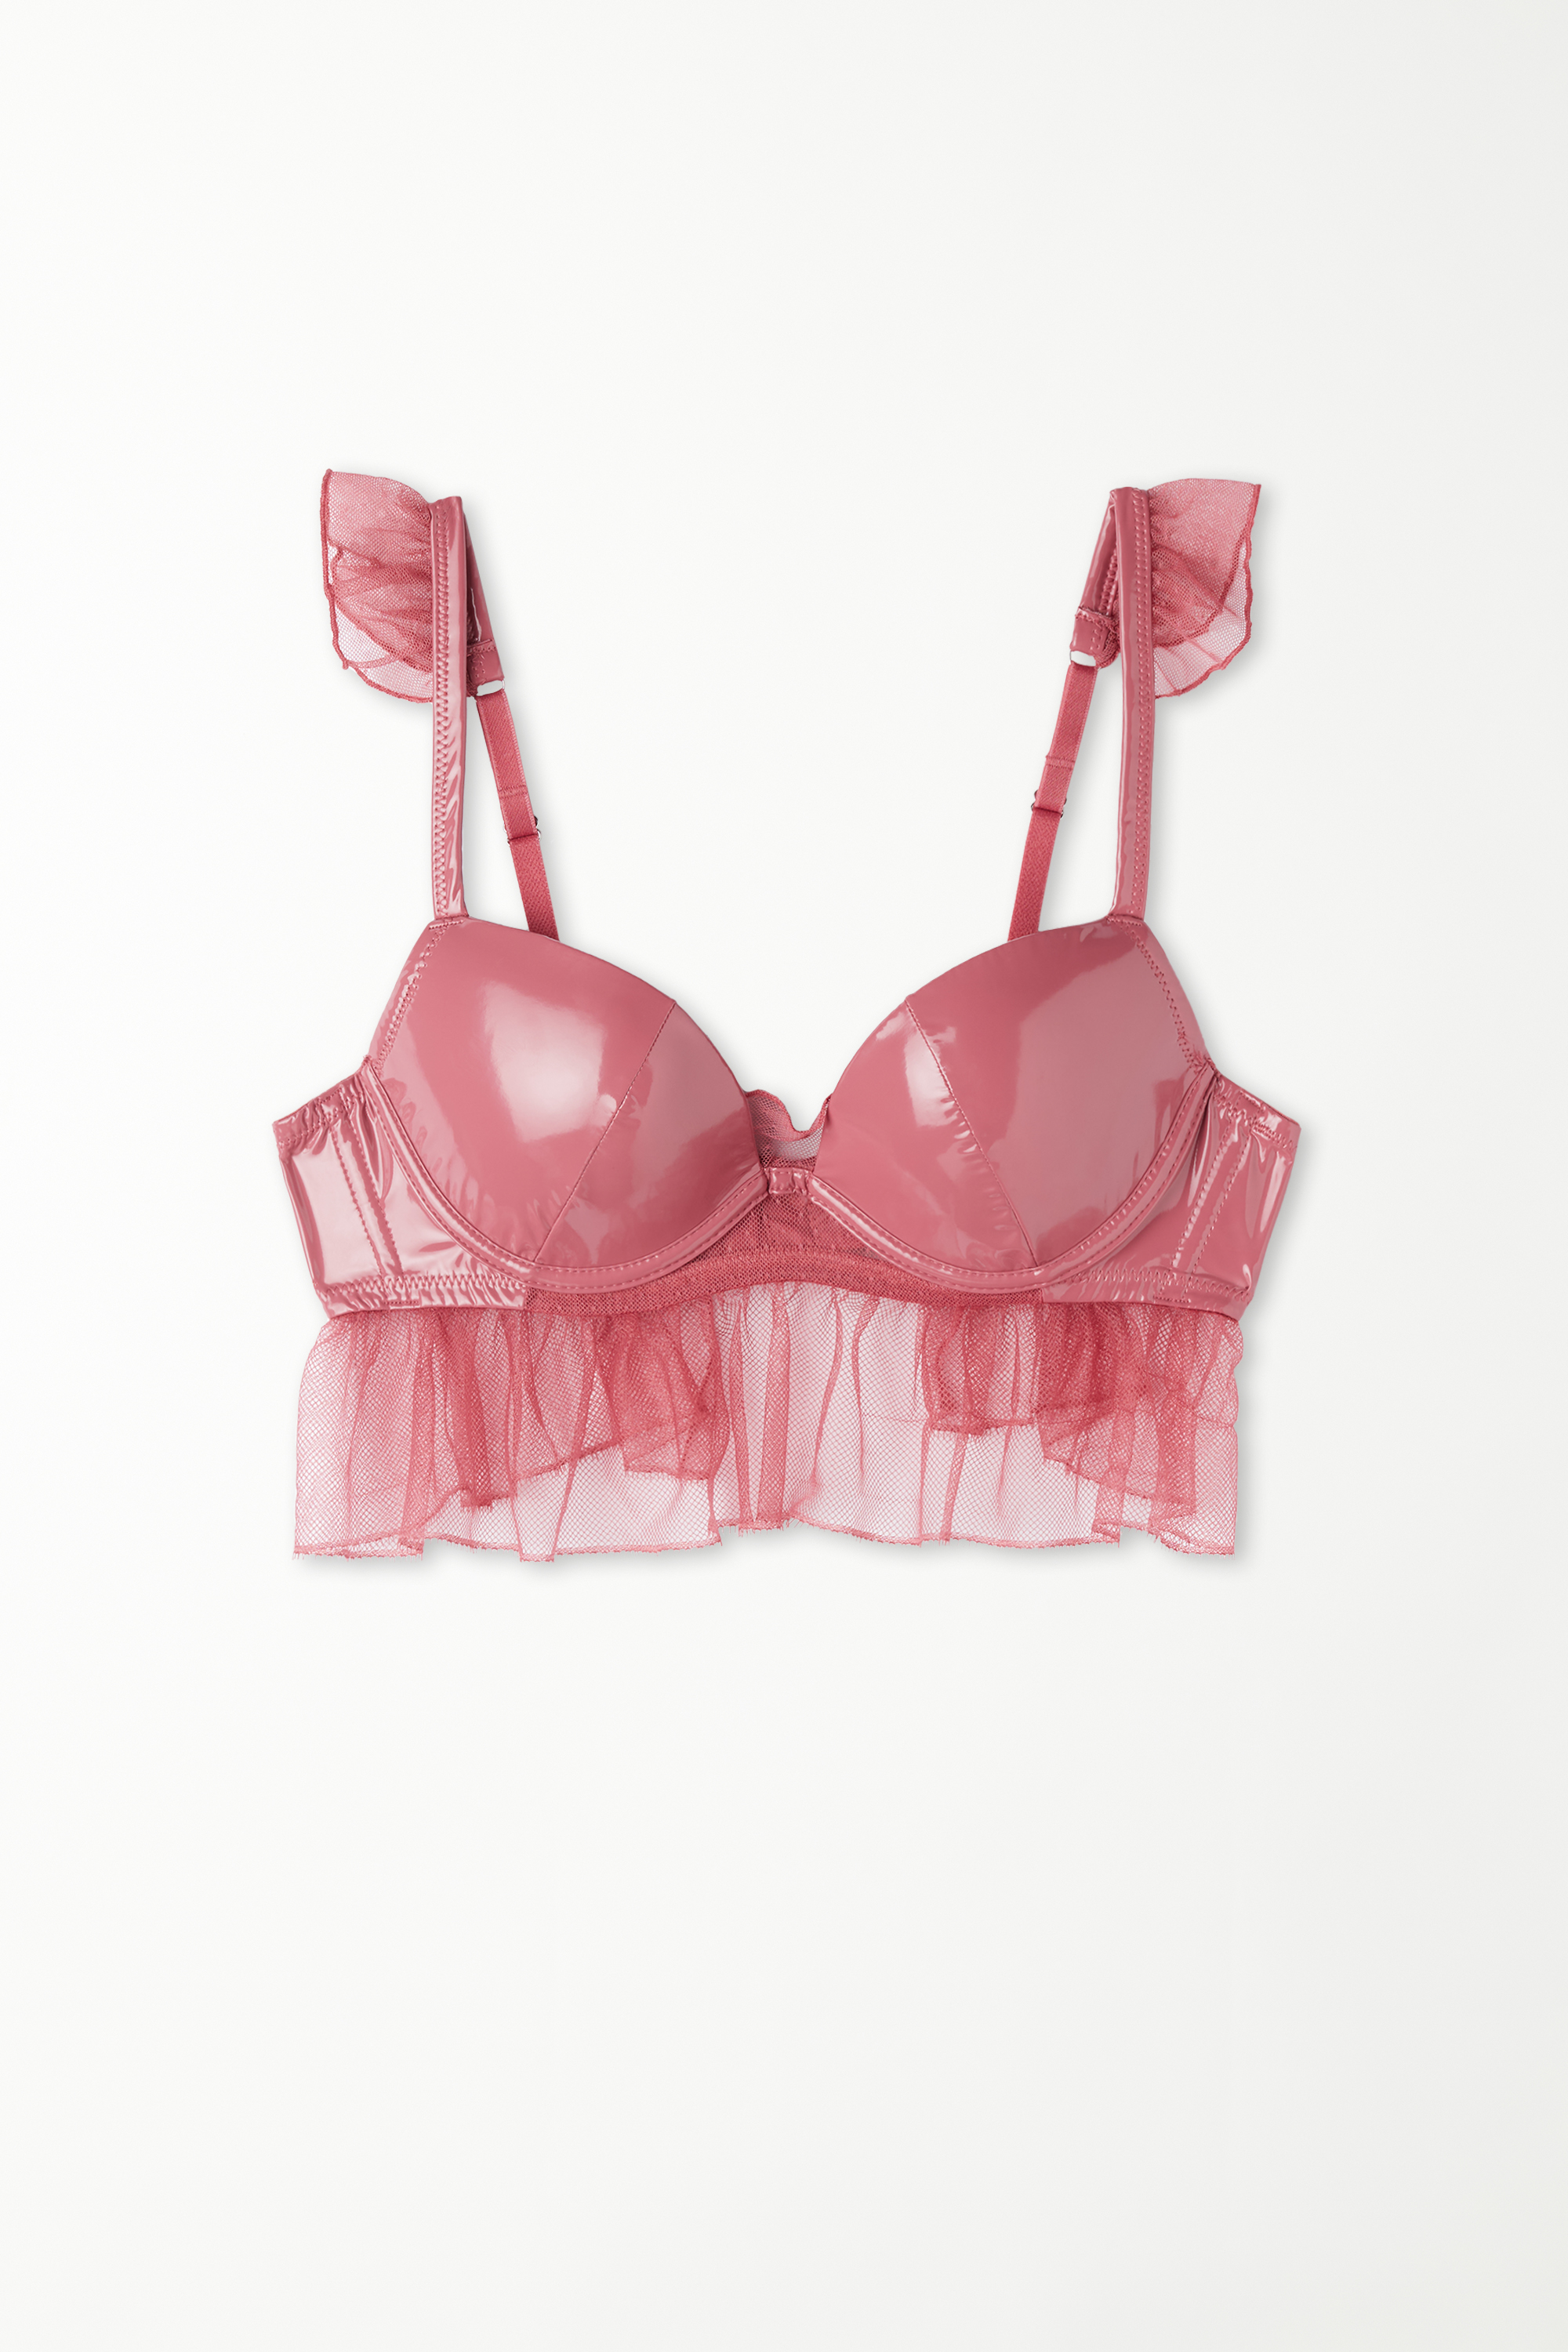 Amorous Vynil Moscow Push-up Bra